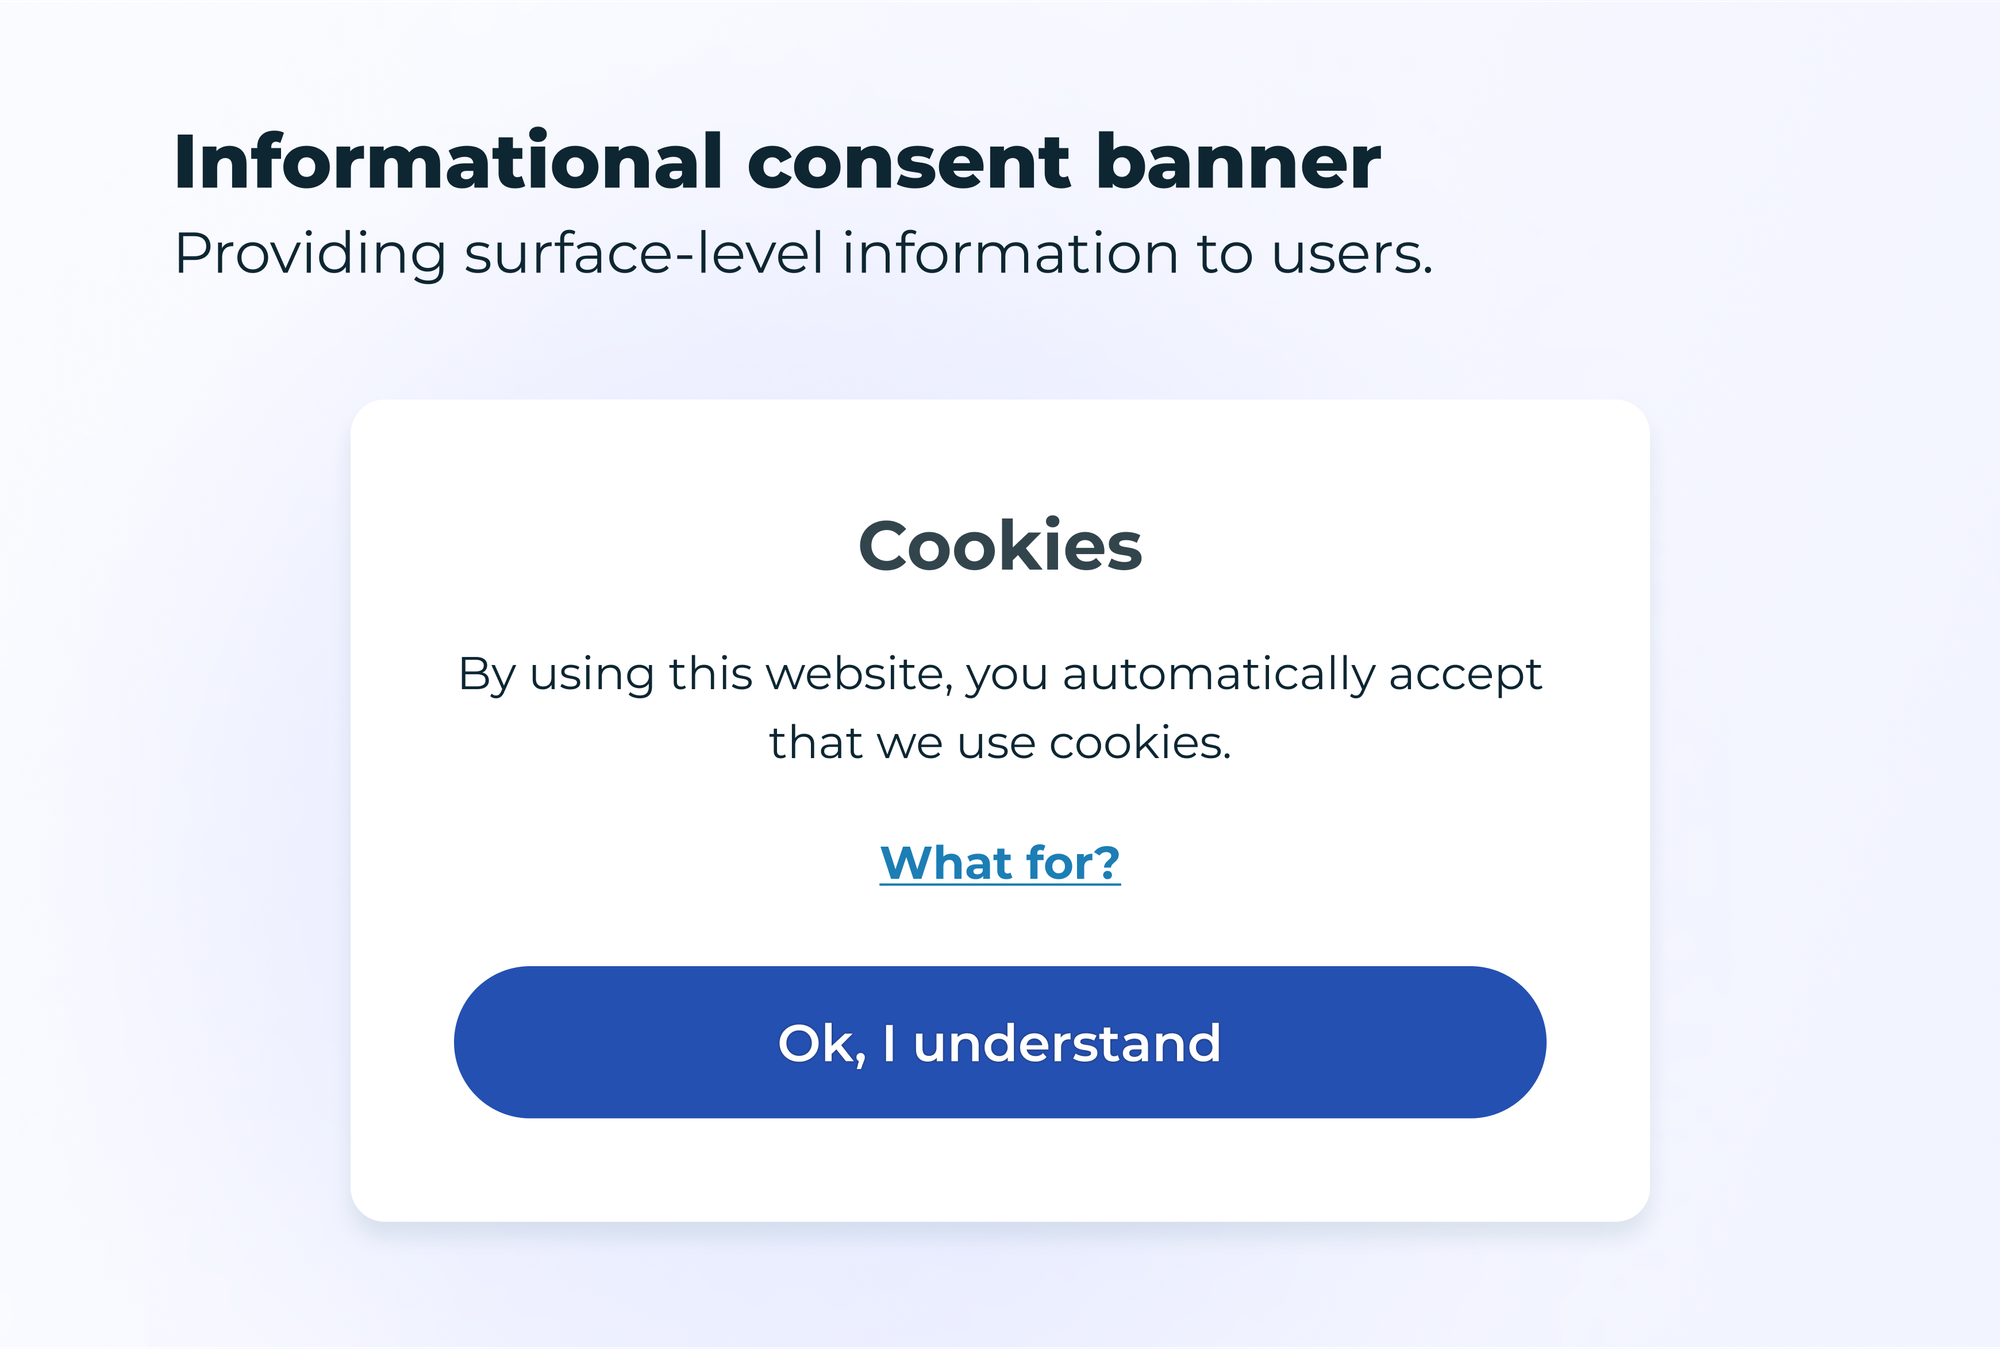 A mockup of an informational consent banner, with the title "informational consent banner" and the subtitle "Providing surface-level information to users."